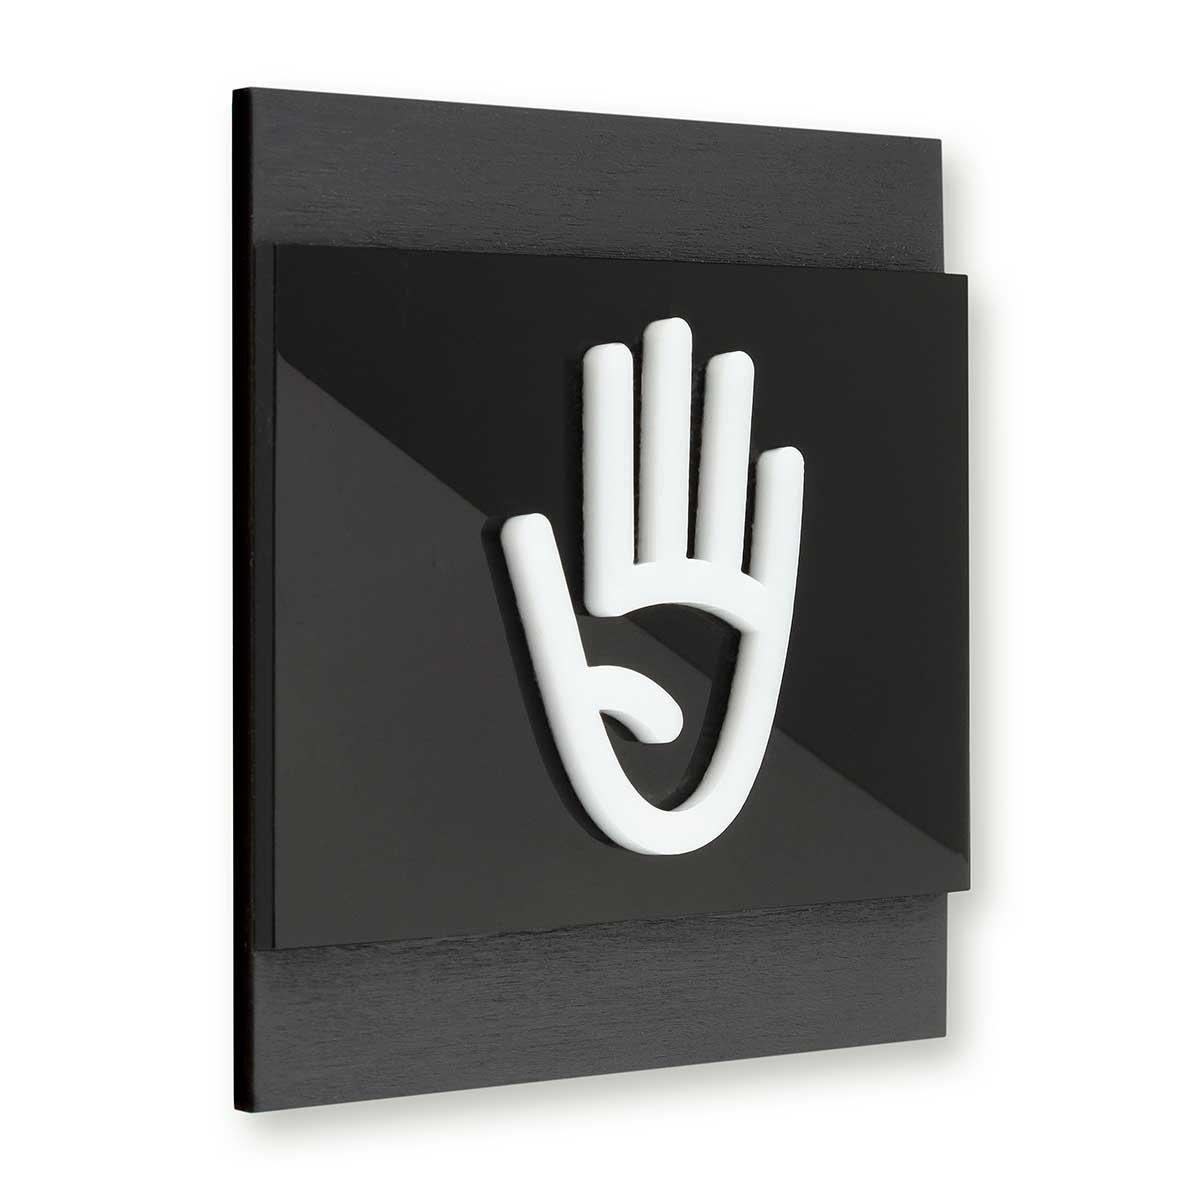 Employees Only Wooden Door Signs Information signs Anthracite Gray Bsign